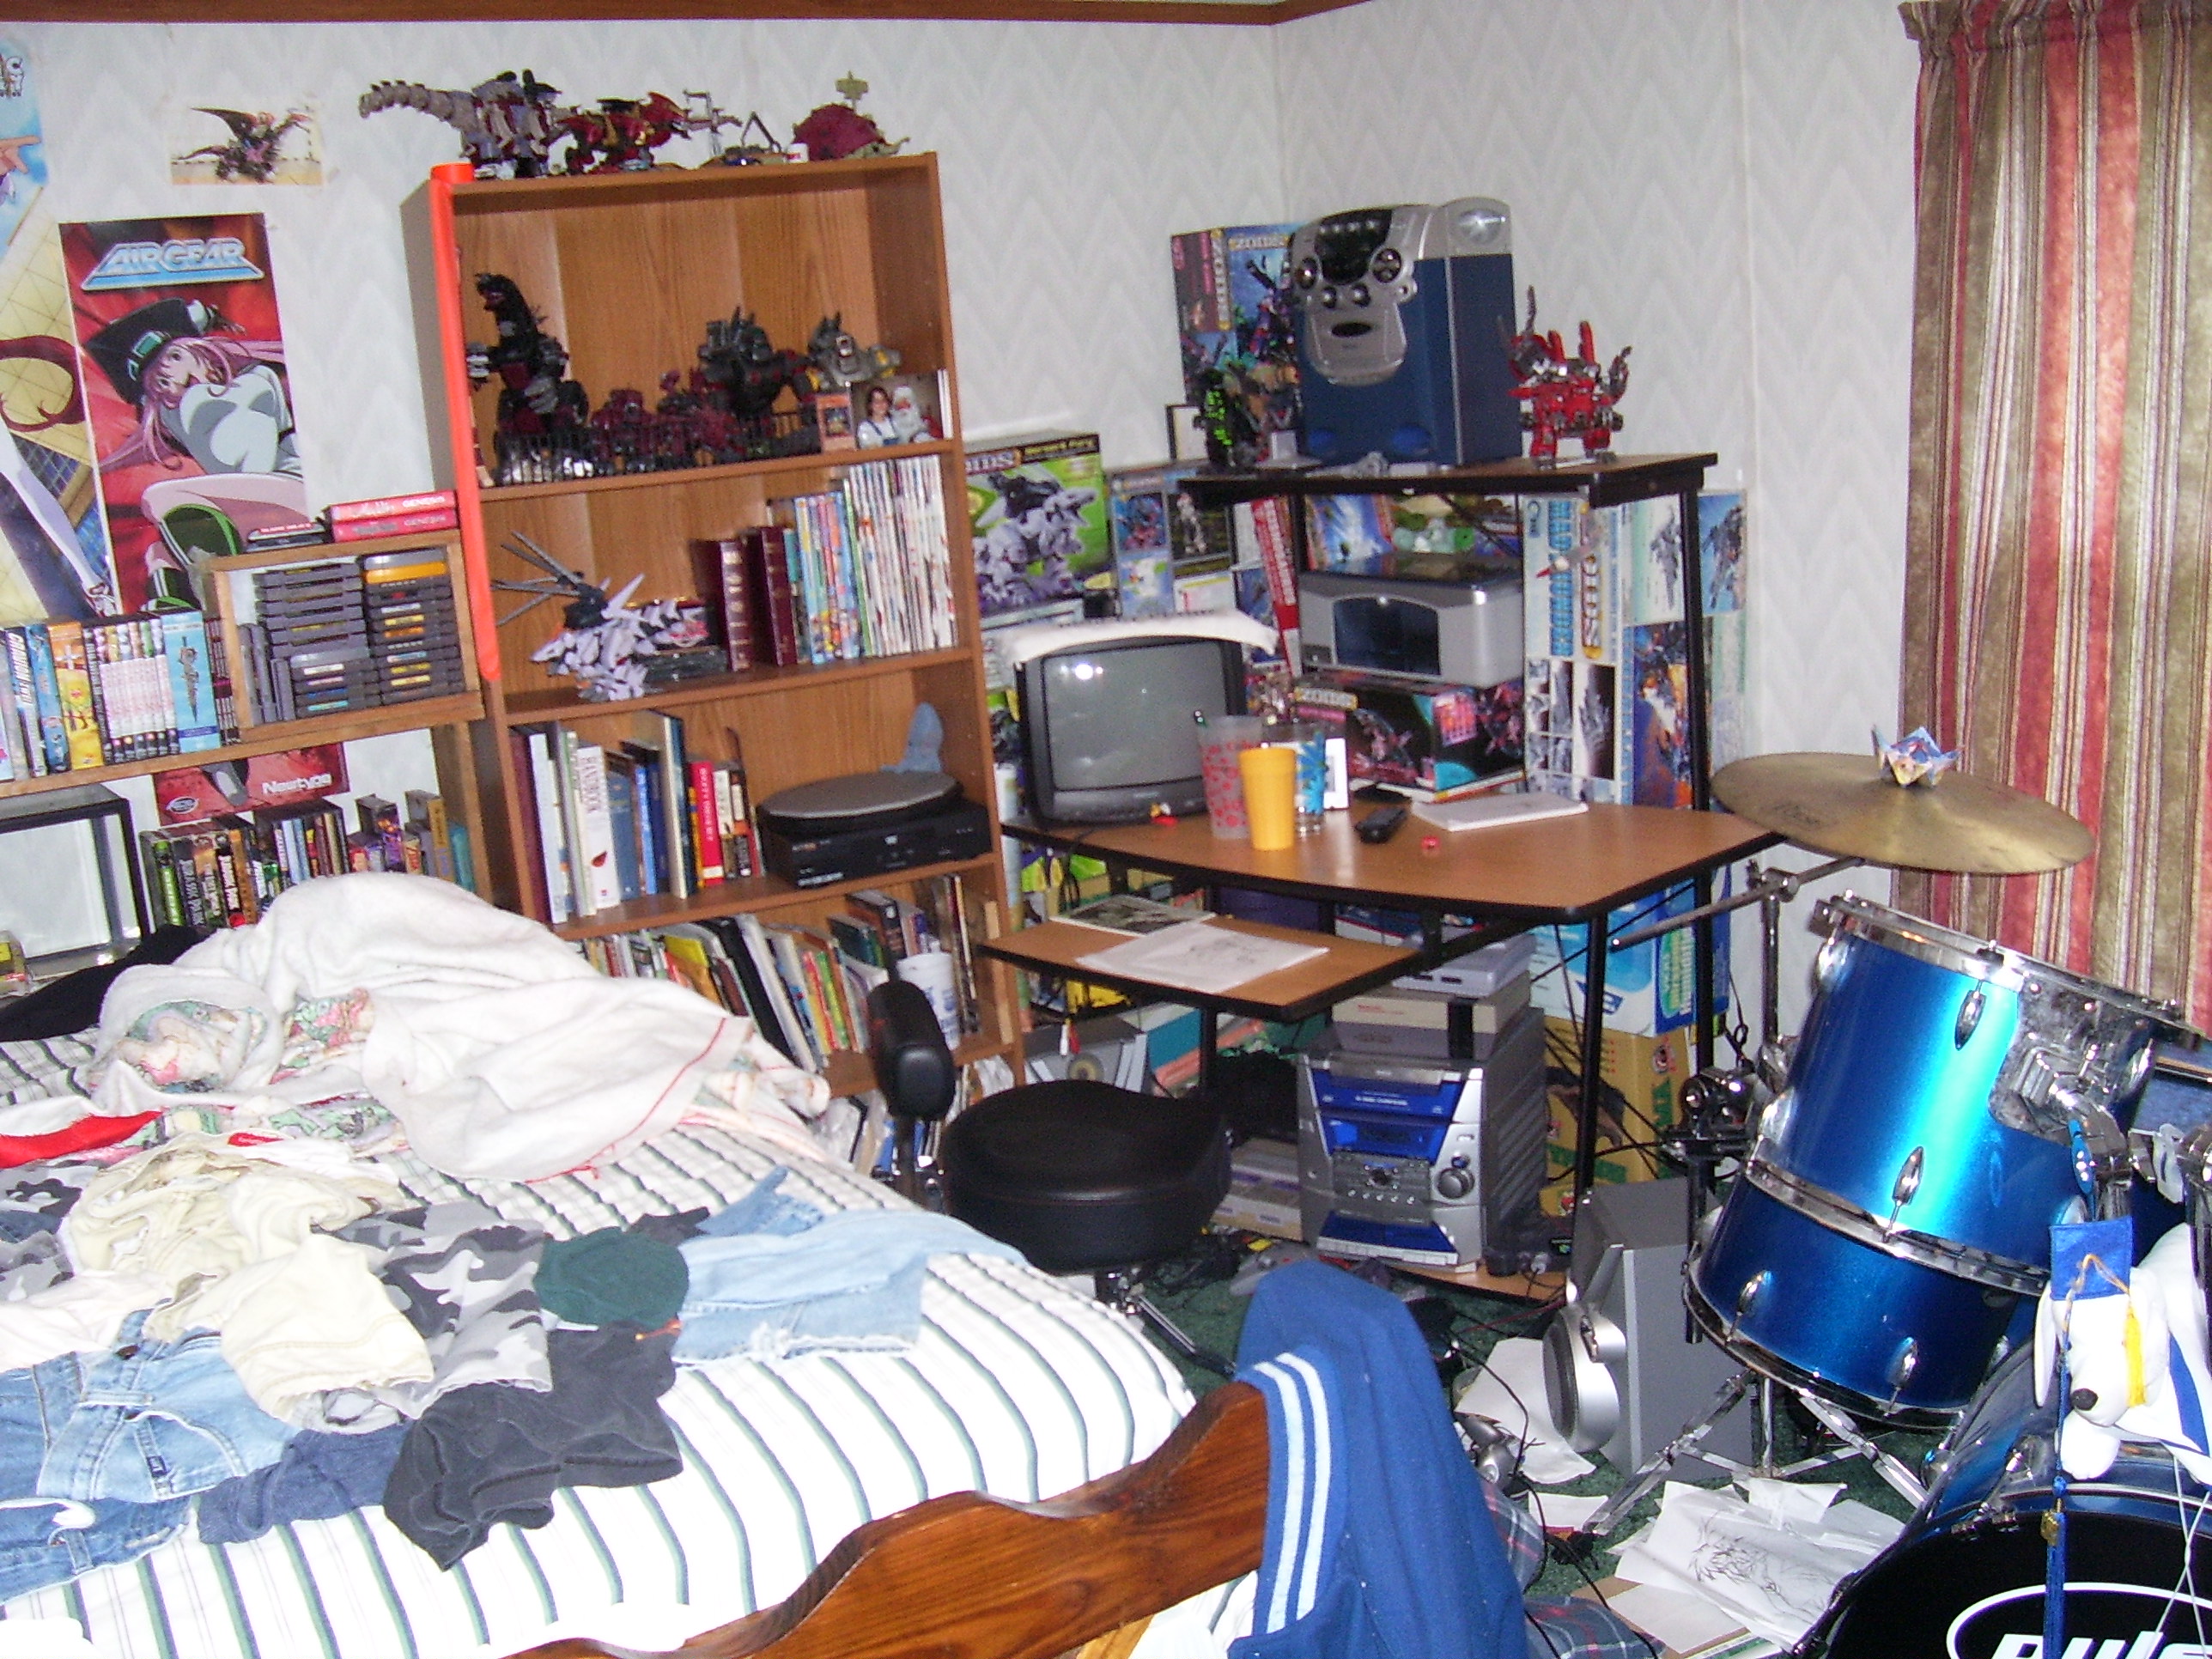 EXTREMELY MESSY room by Twilightof87 on DeviantArt
